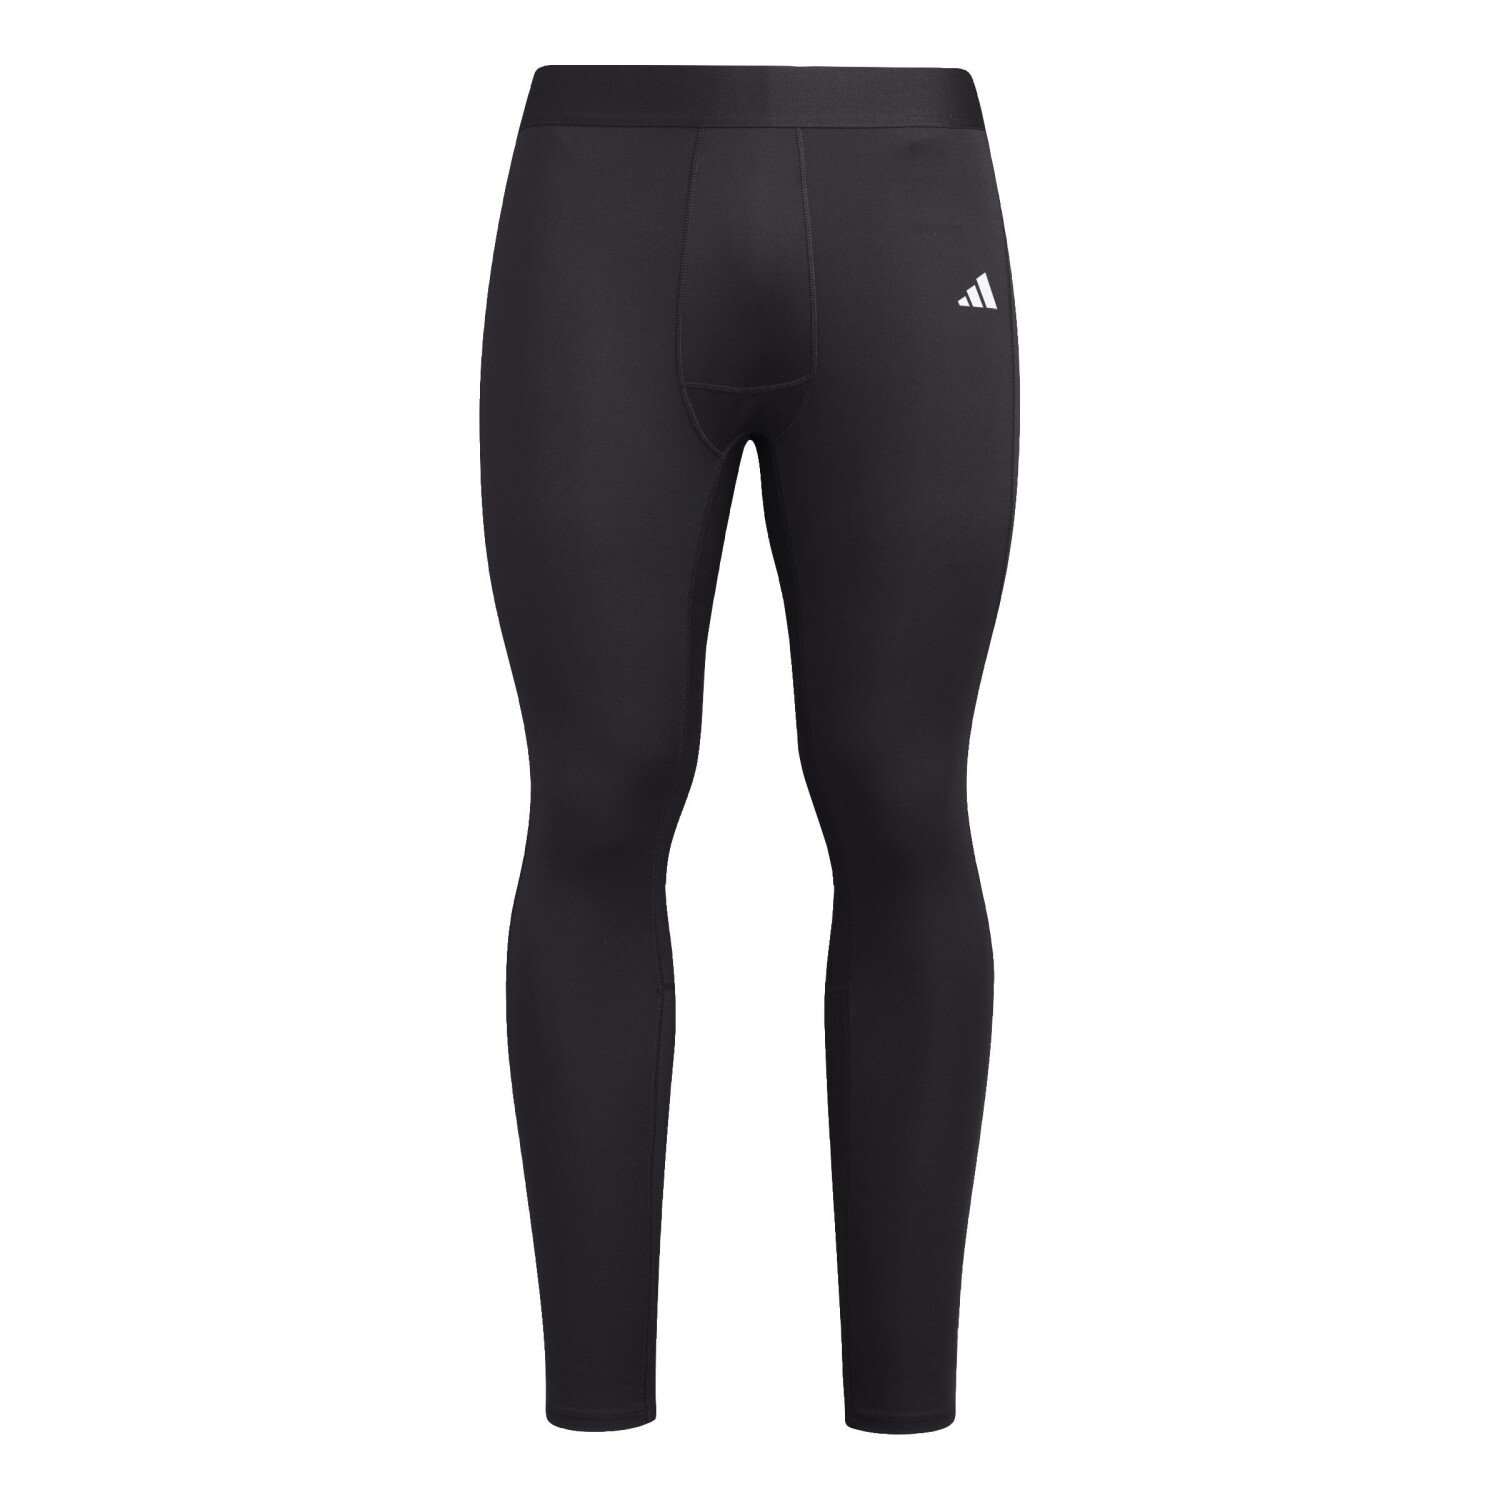 https://www.totalfootballdirect.com/Cache/Images/Adidas-Techfit-Long-Tights-Black-opaque-1500x1500.jpg